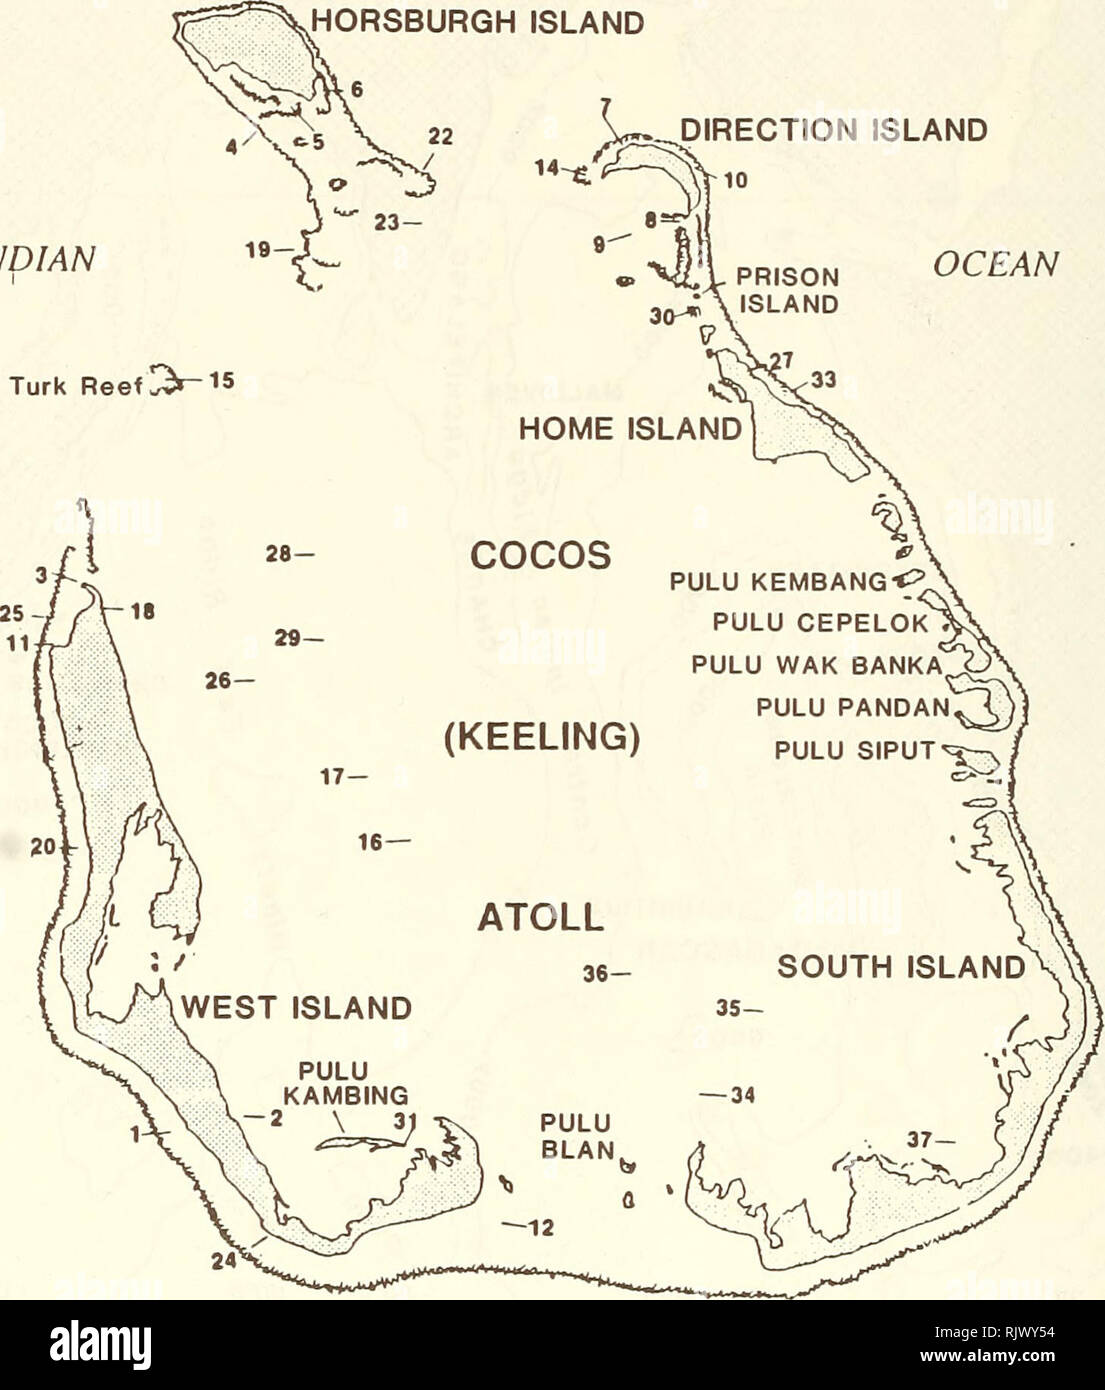 . Atoll research bulletin. Coral reefs and islands; Marine biology; Marine sciences. ,HORSBURGH ISLAND 6 -12Â°05' L- c INDIAN OCEAN -^â MO'. kilometres 96Â°50' 96&quot;S5- I Figure 2. The Cocos (Keeling) Islands, showing stations from which collections were made during the Western Australian Museum expedition in 1989. These stations cover a series of different marine habitats (see Chapter 8, Fig. 1), which can be summarised as: Outer Reef Slope (9 sites: stations 4, 7, 13, 15, 19, 22, 25, 32, and 33), Reef Flat (13 sites: stations 1, 3, 6, 8, 10, 11, 12, 14, 20, 21, 24, 27, and 30) and lagoon  Stock Photo